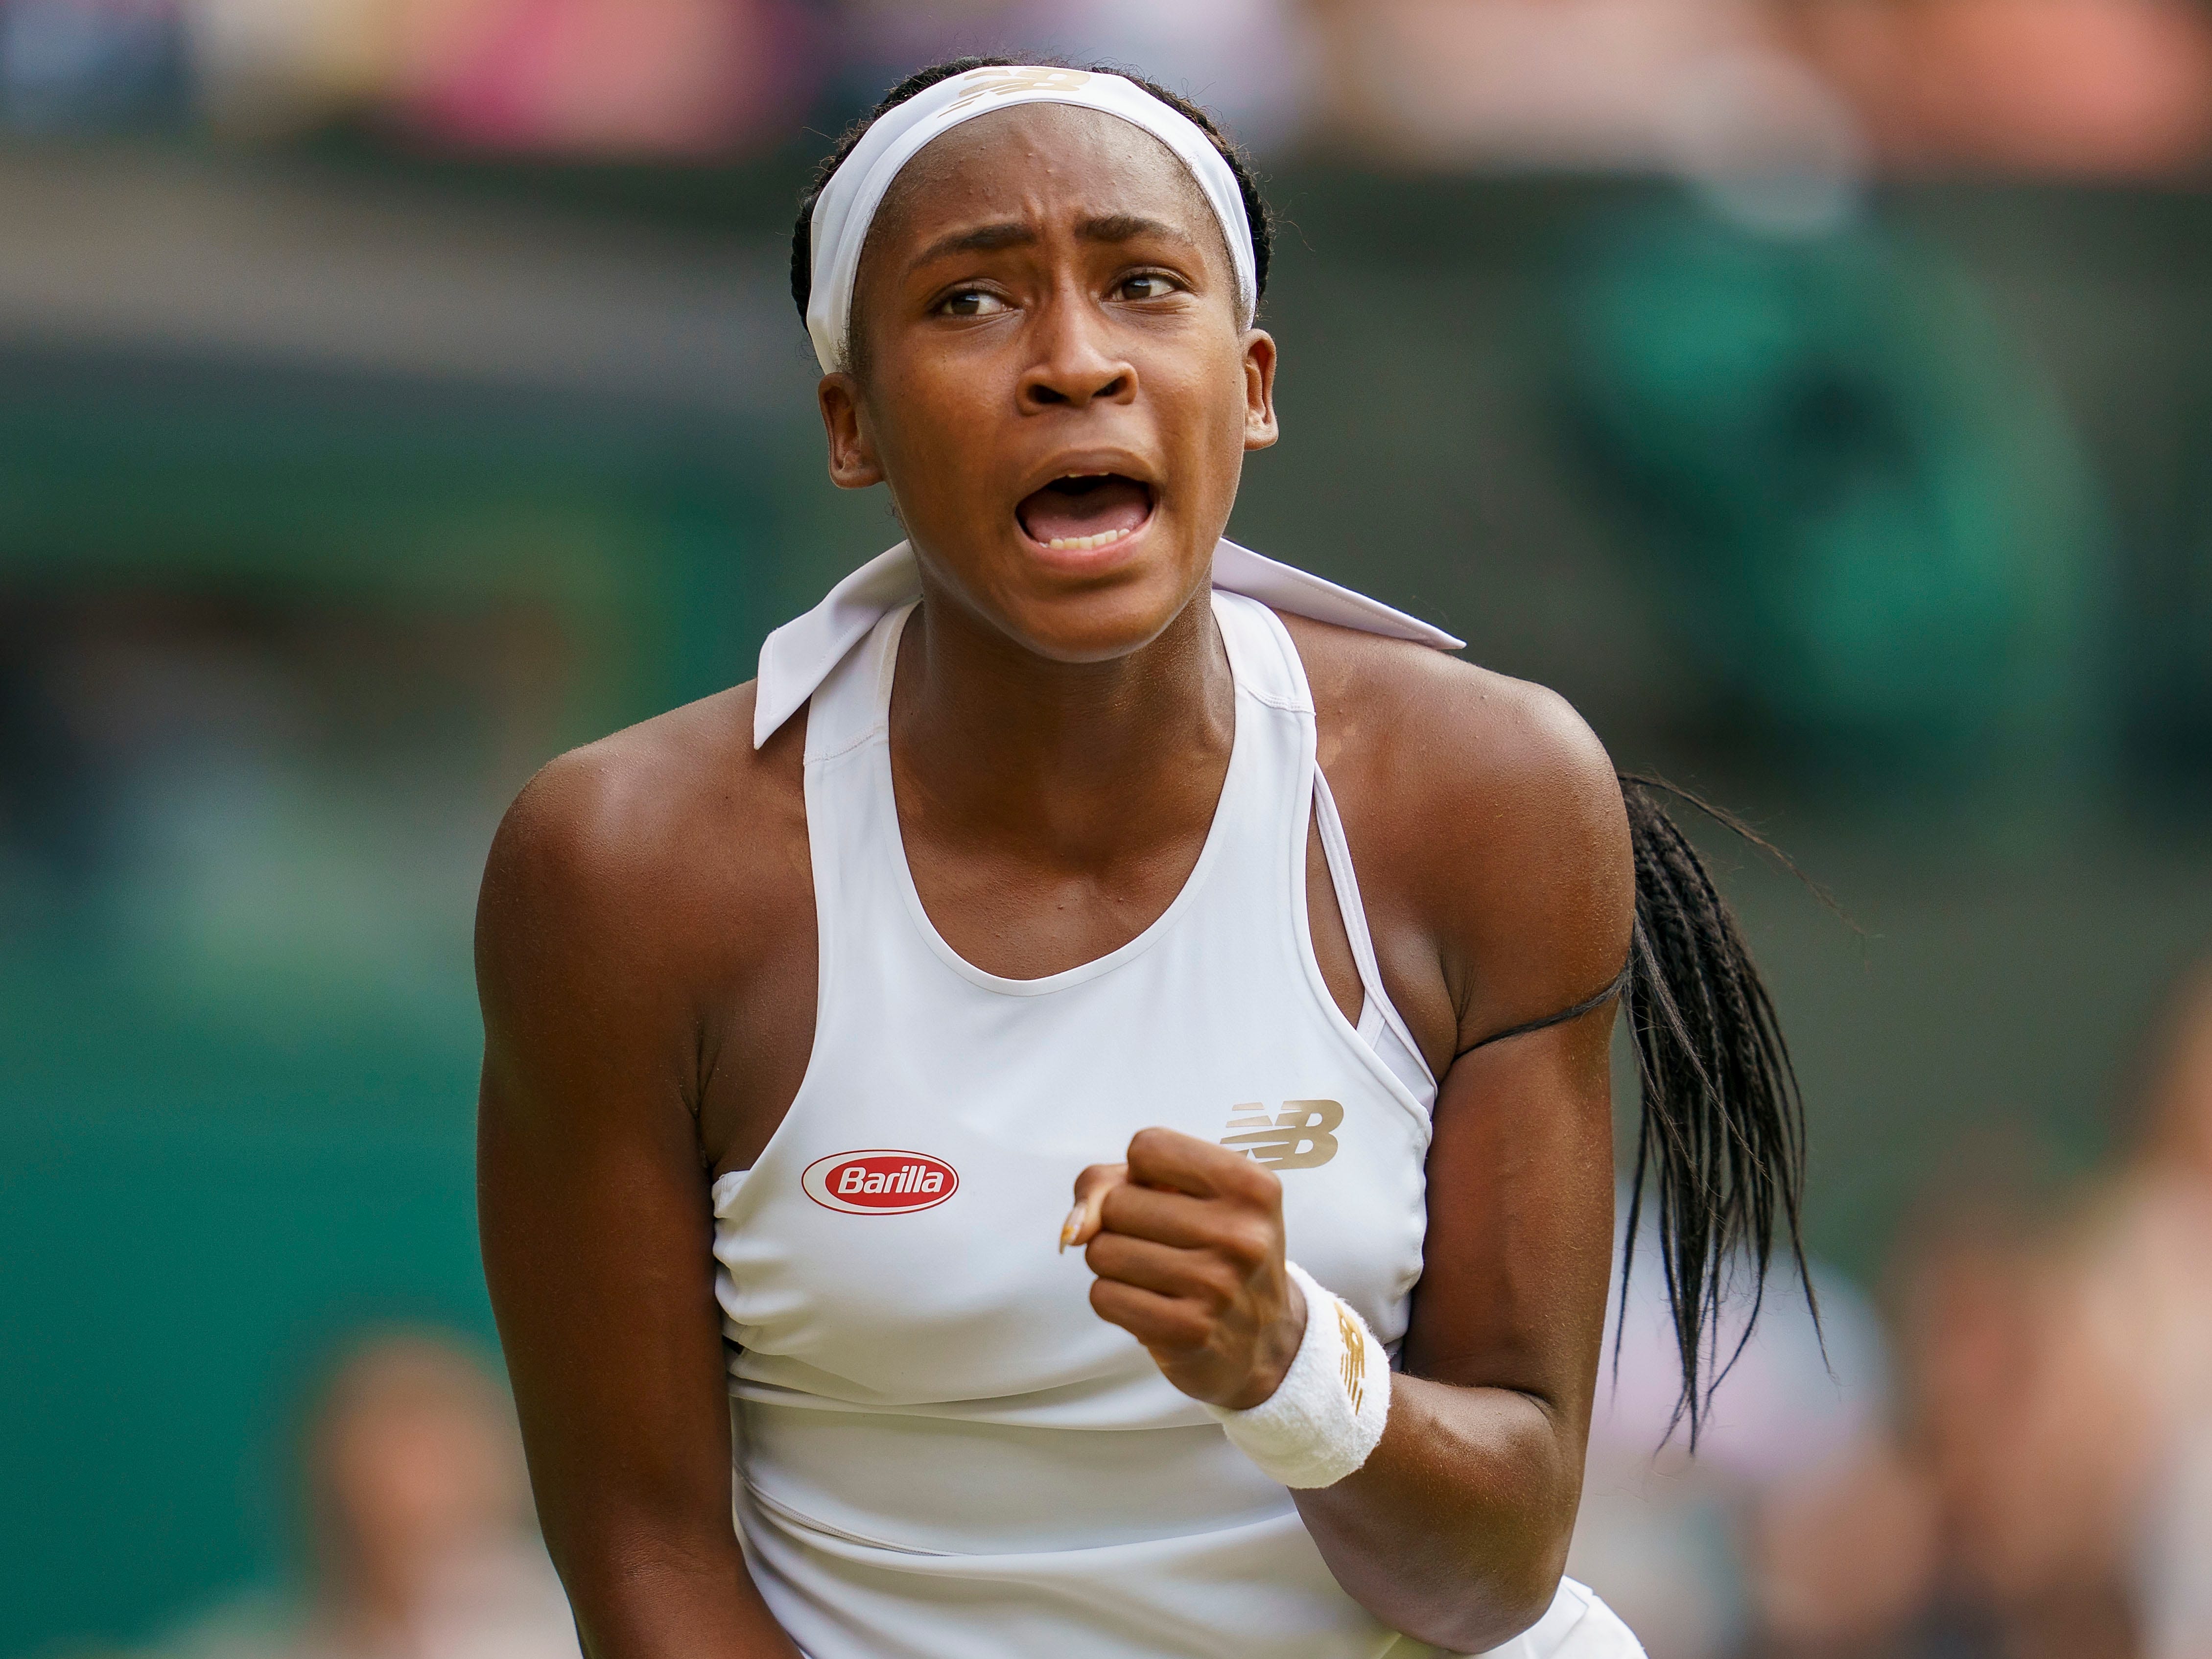 Coco Gauff reacts during her match against Polona Hercog during the third round of Wimbledon in 2019.